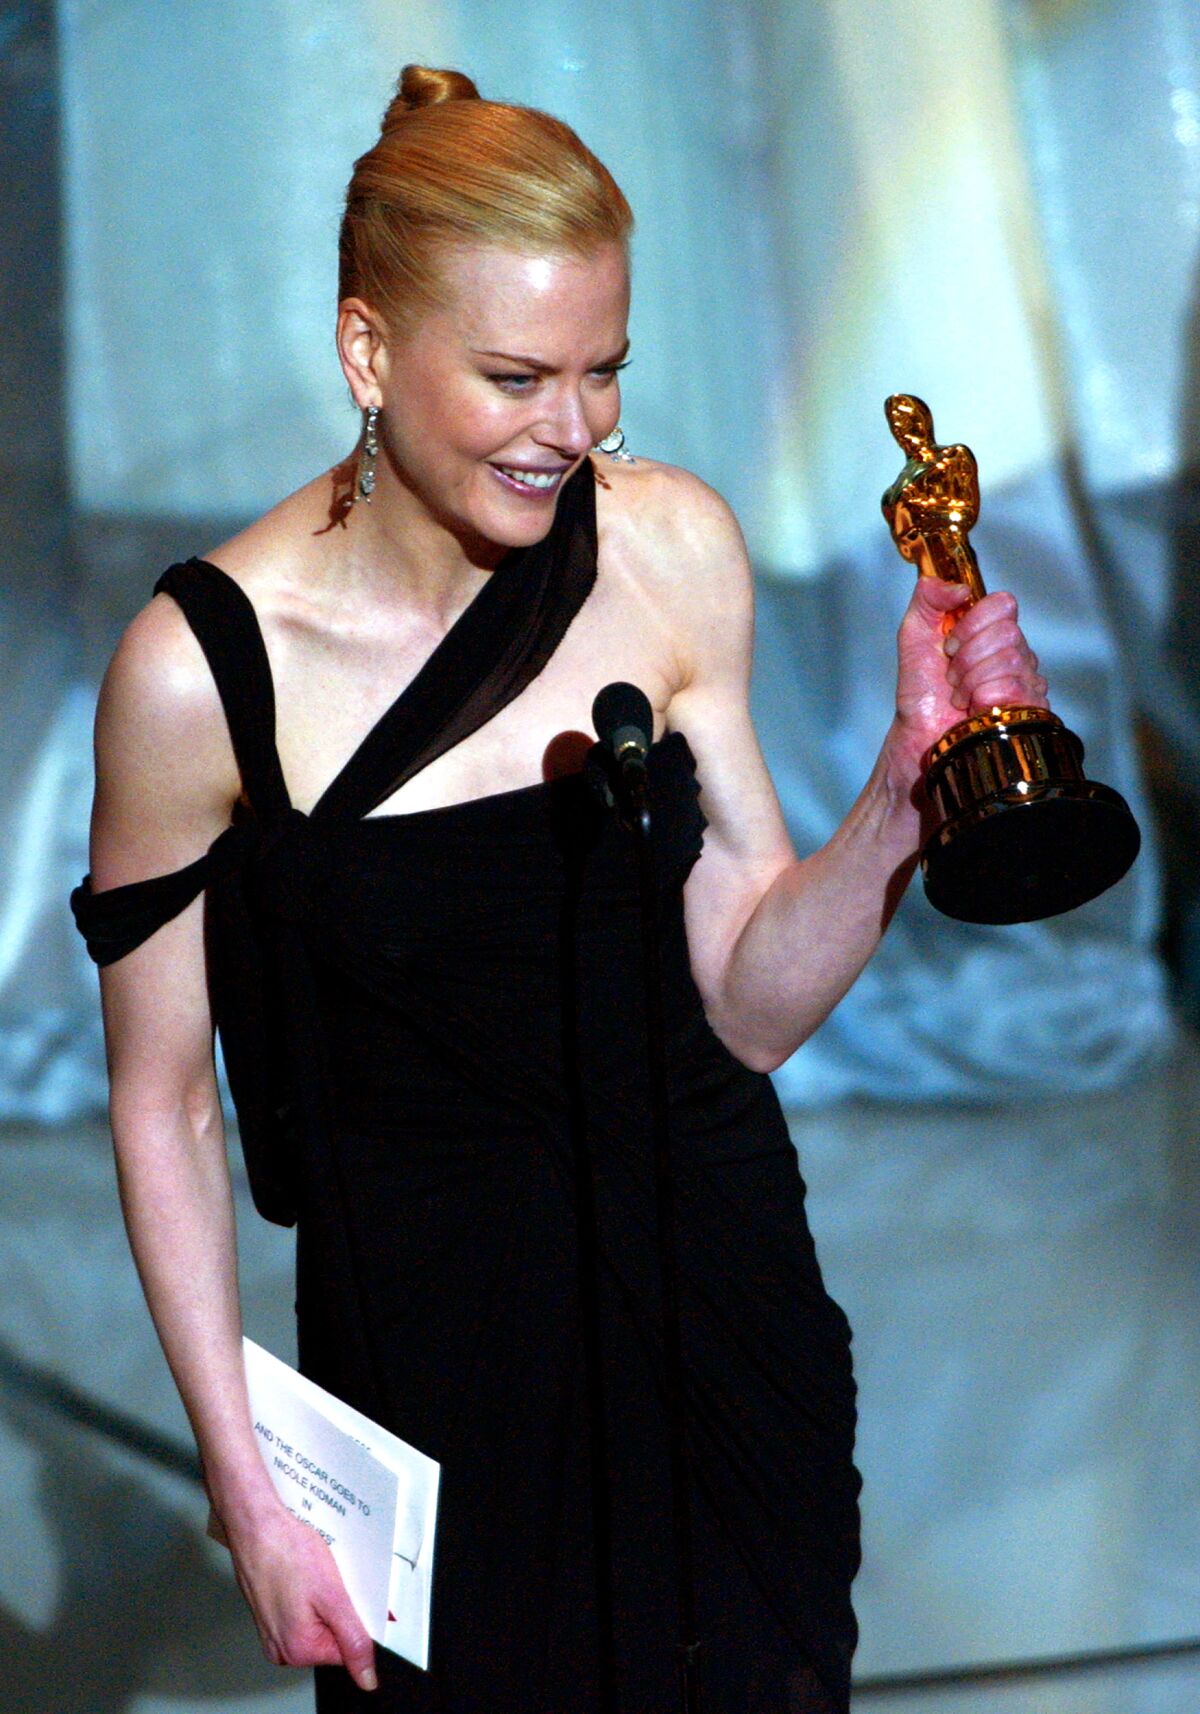 Actress Nicole Kidman reacts as she accepts the Oscar for best actress at the 75th Academy Awards.